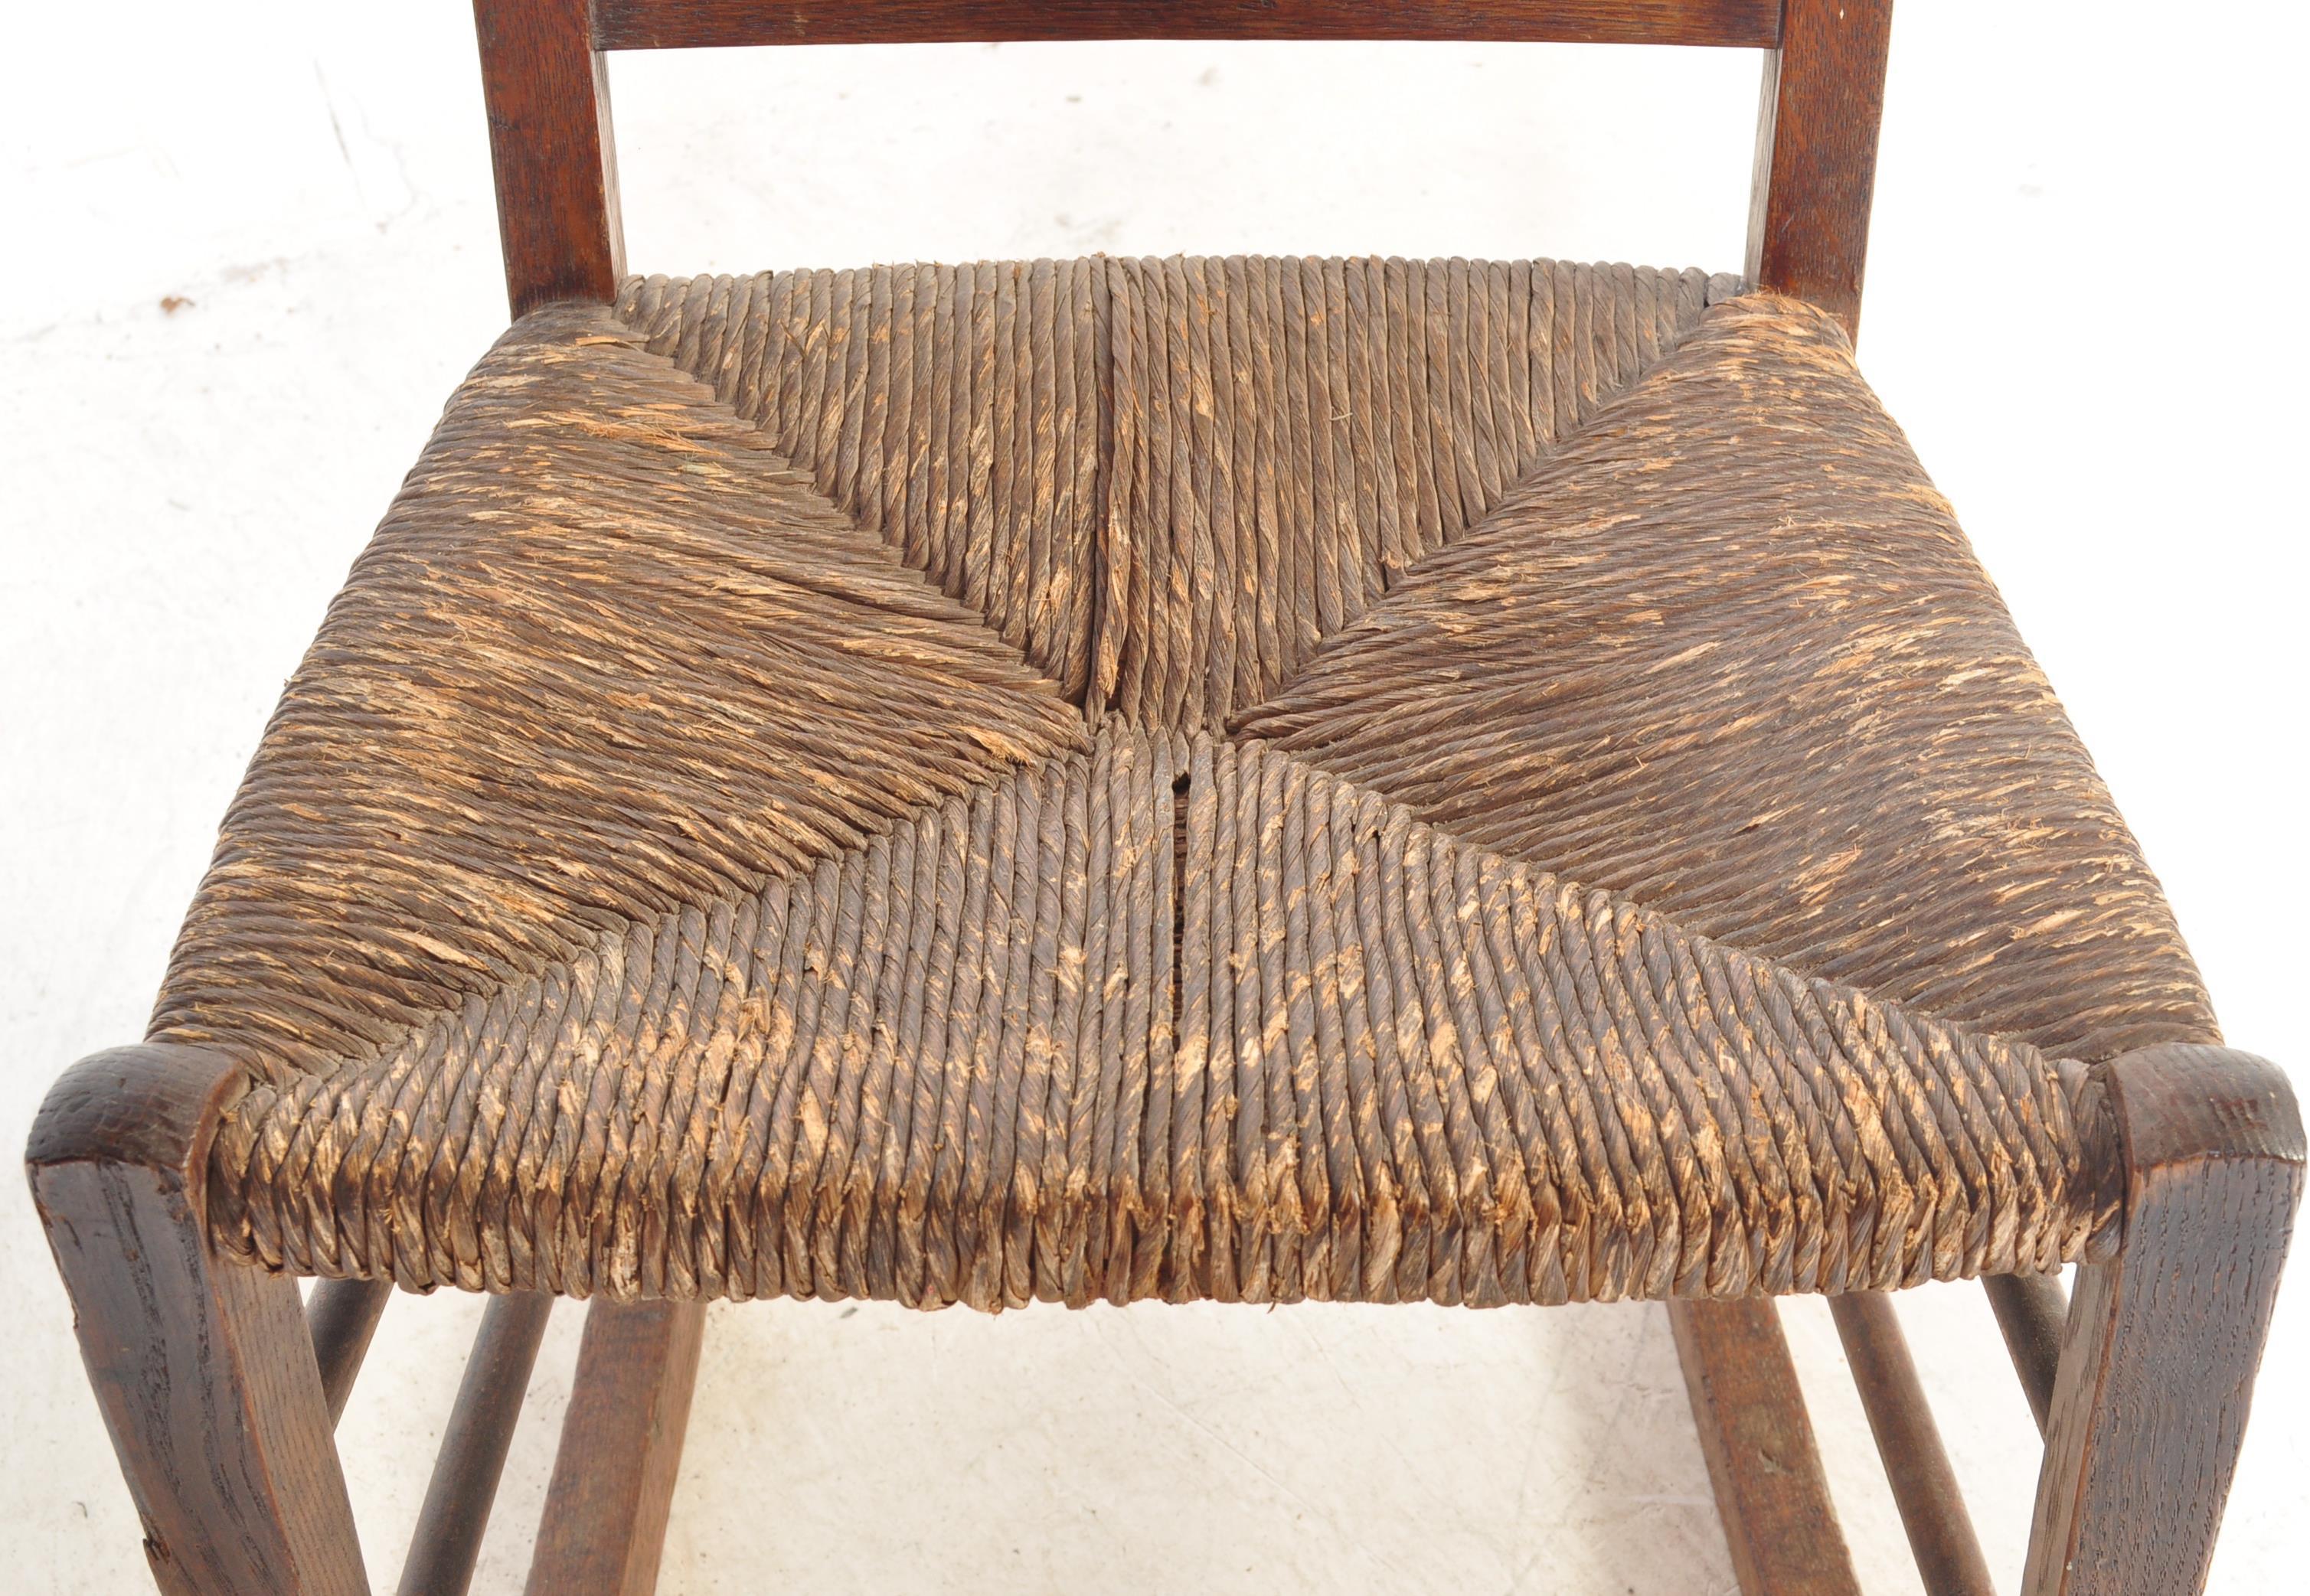 LATE 19TH CENTURY ARTS & CRAFTS CHILDS ROCKING CHAIR - Image 3 of 6